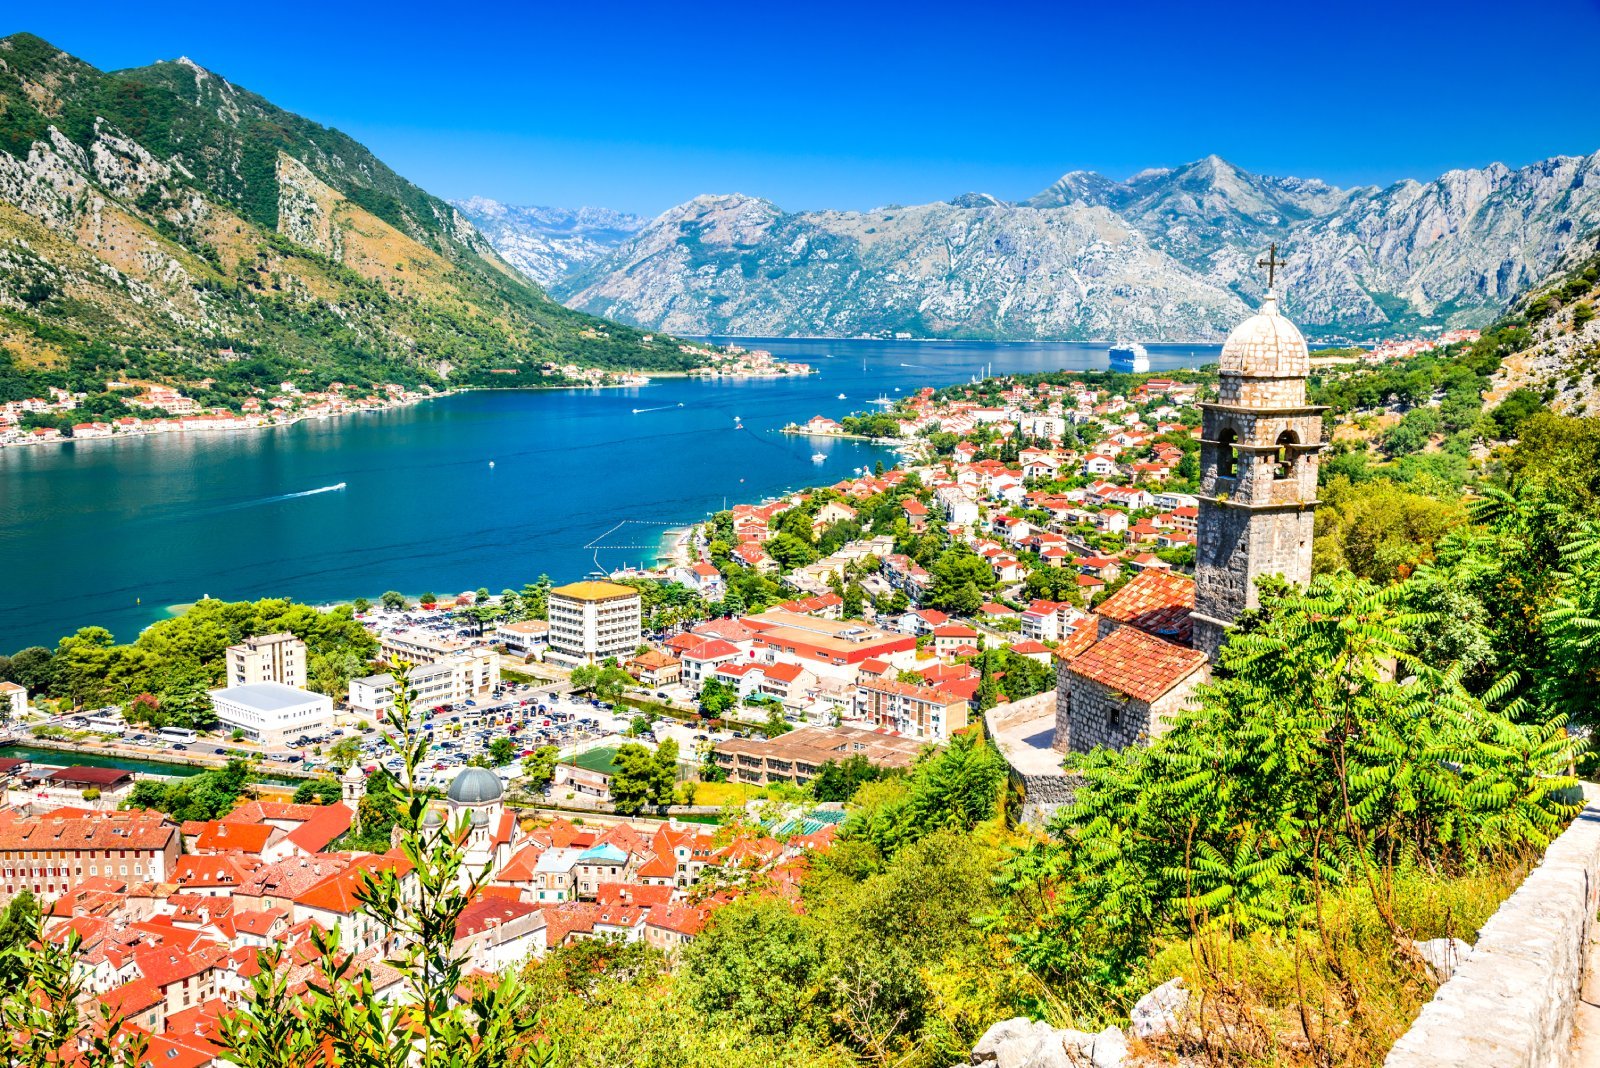 <p class="wp-caption-text">Image Credit: Shutterstock / ecstk22</p>  <p>Kotor features stunning Adriatic Sea views, a charming Old Town, and budget-friendly lodging, making it a great destination for travelers watching their expenses.</p>